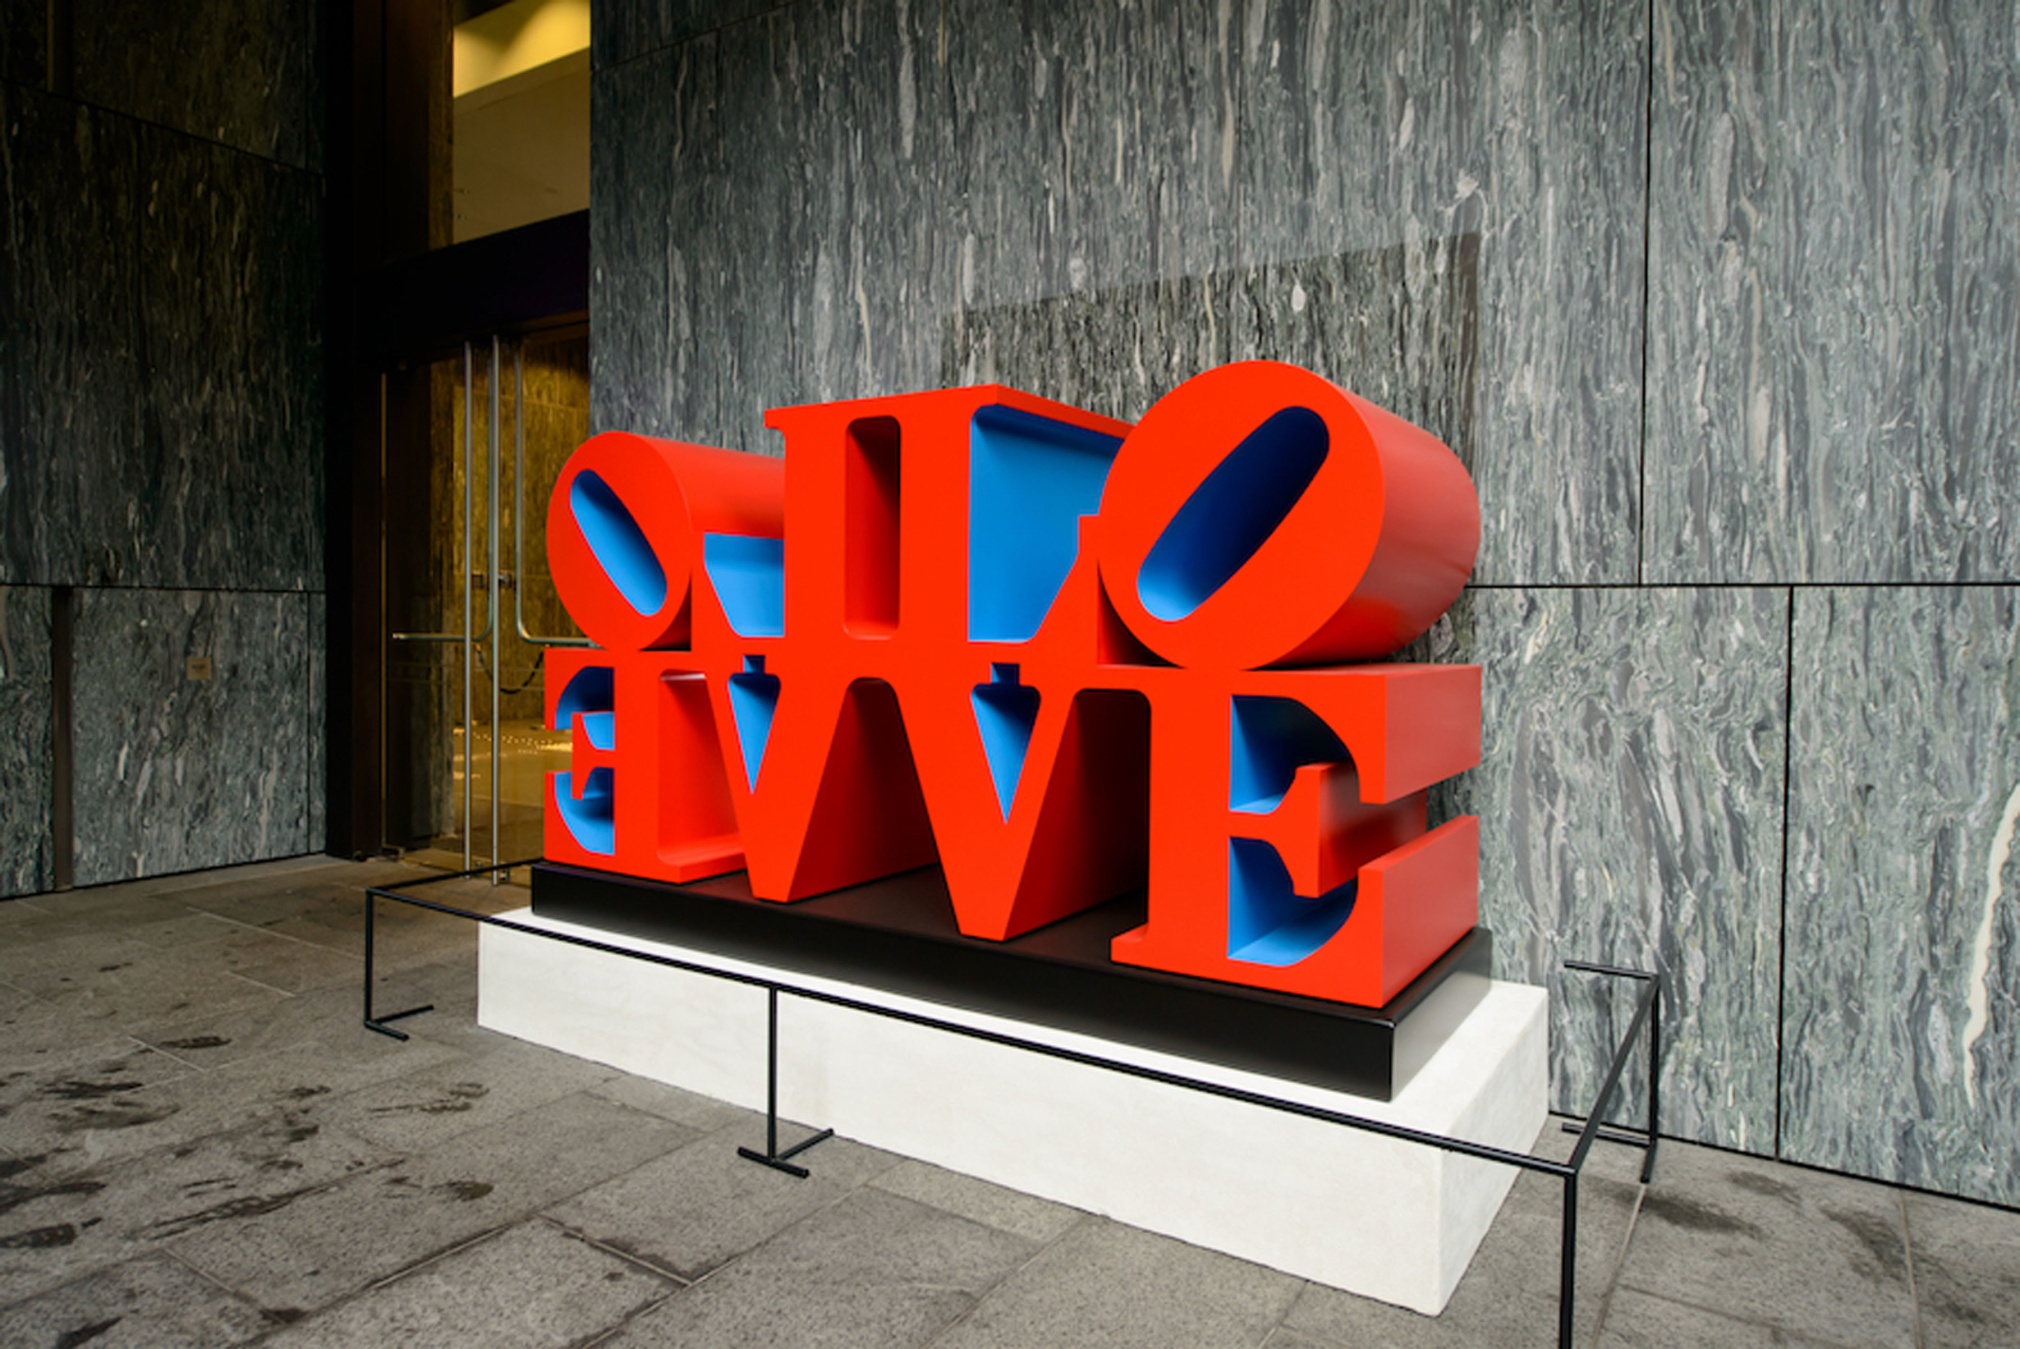 Imperial LOVE, a polychrome aluminum sculpture consisting of two quadripartite LOVE sculptures side by side, with the L and V of each sculpture back to back and the O and E facing outwards. The faces and sides of the sculpture are red, and the insides are blue.